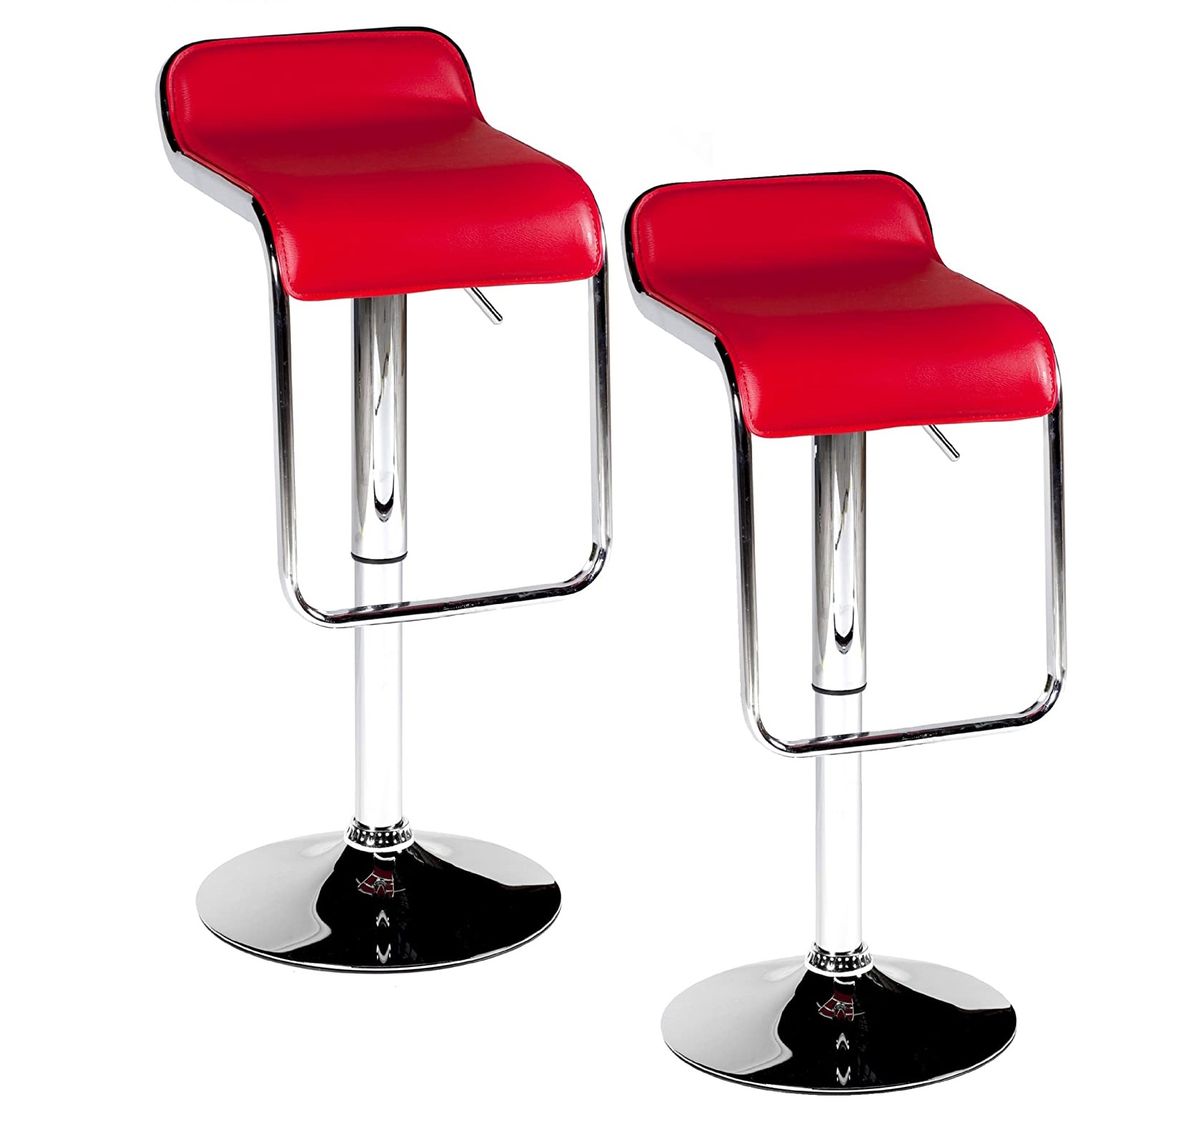 Low Back Leather Bar Stool Set Of 2, Red Leather Bar Stools With Backs